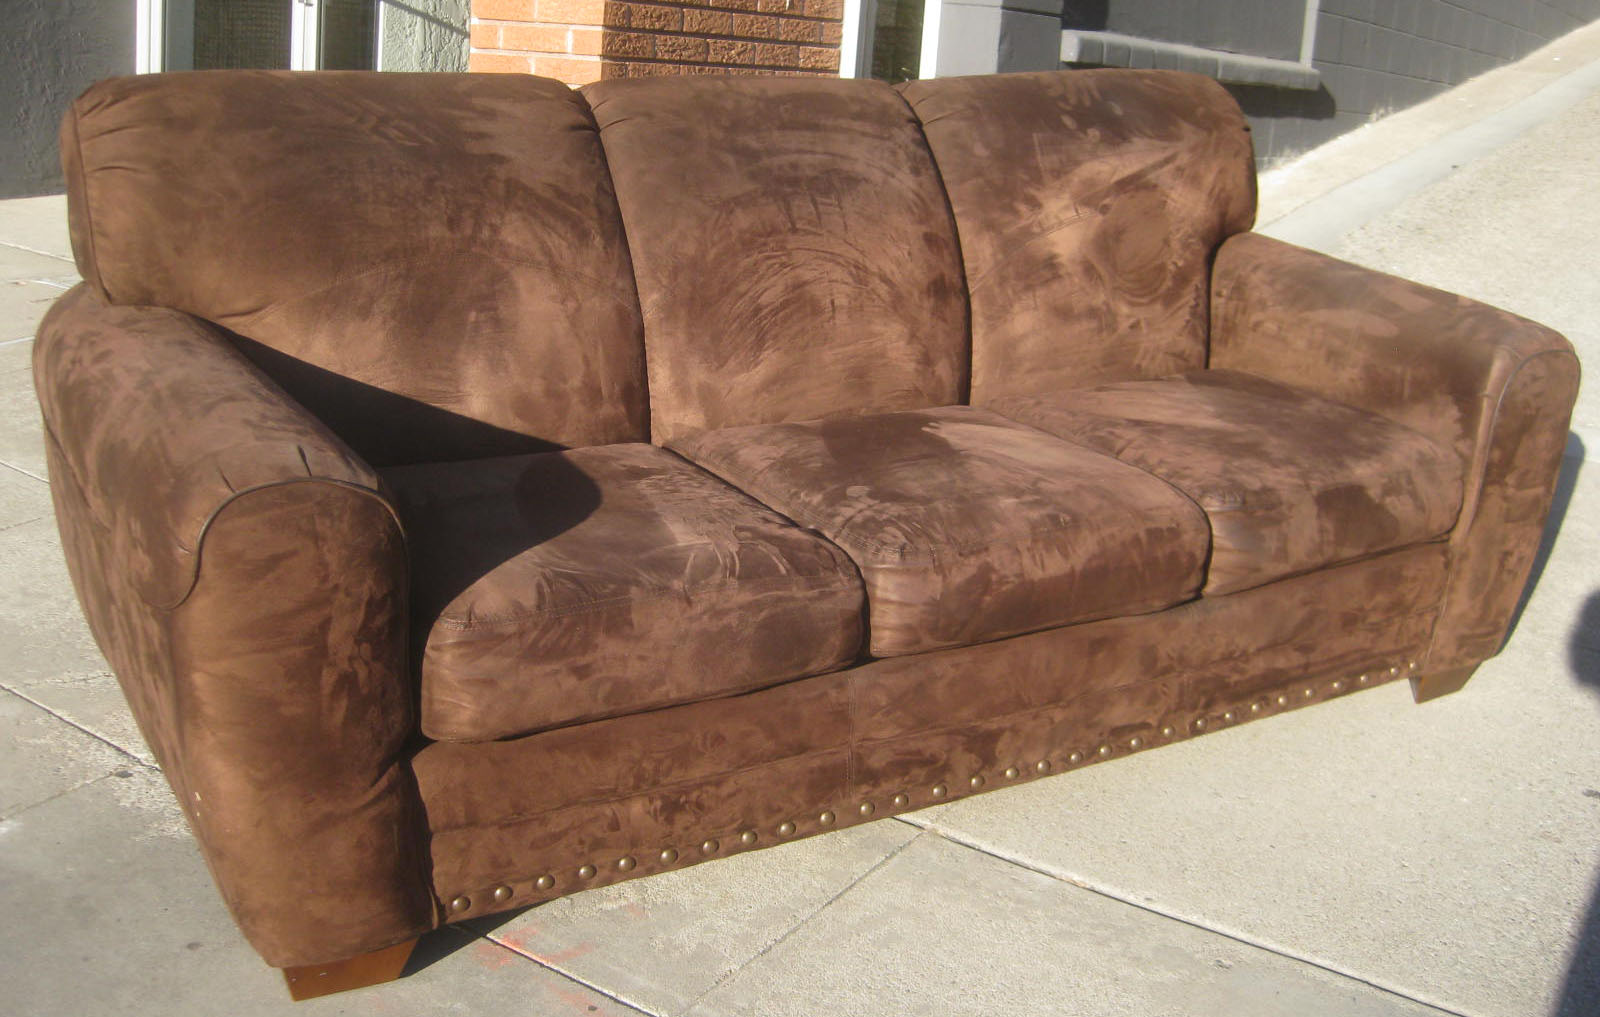 How To Clean Nubuck Leather Sofa